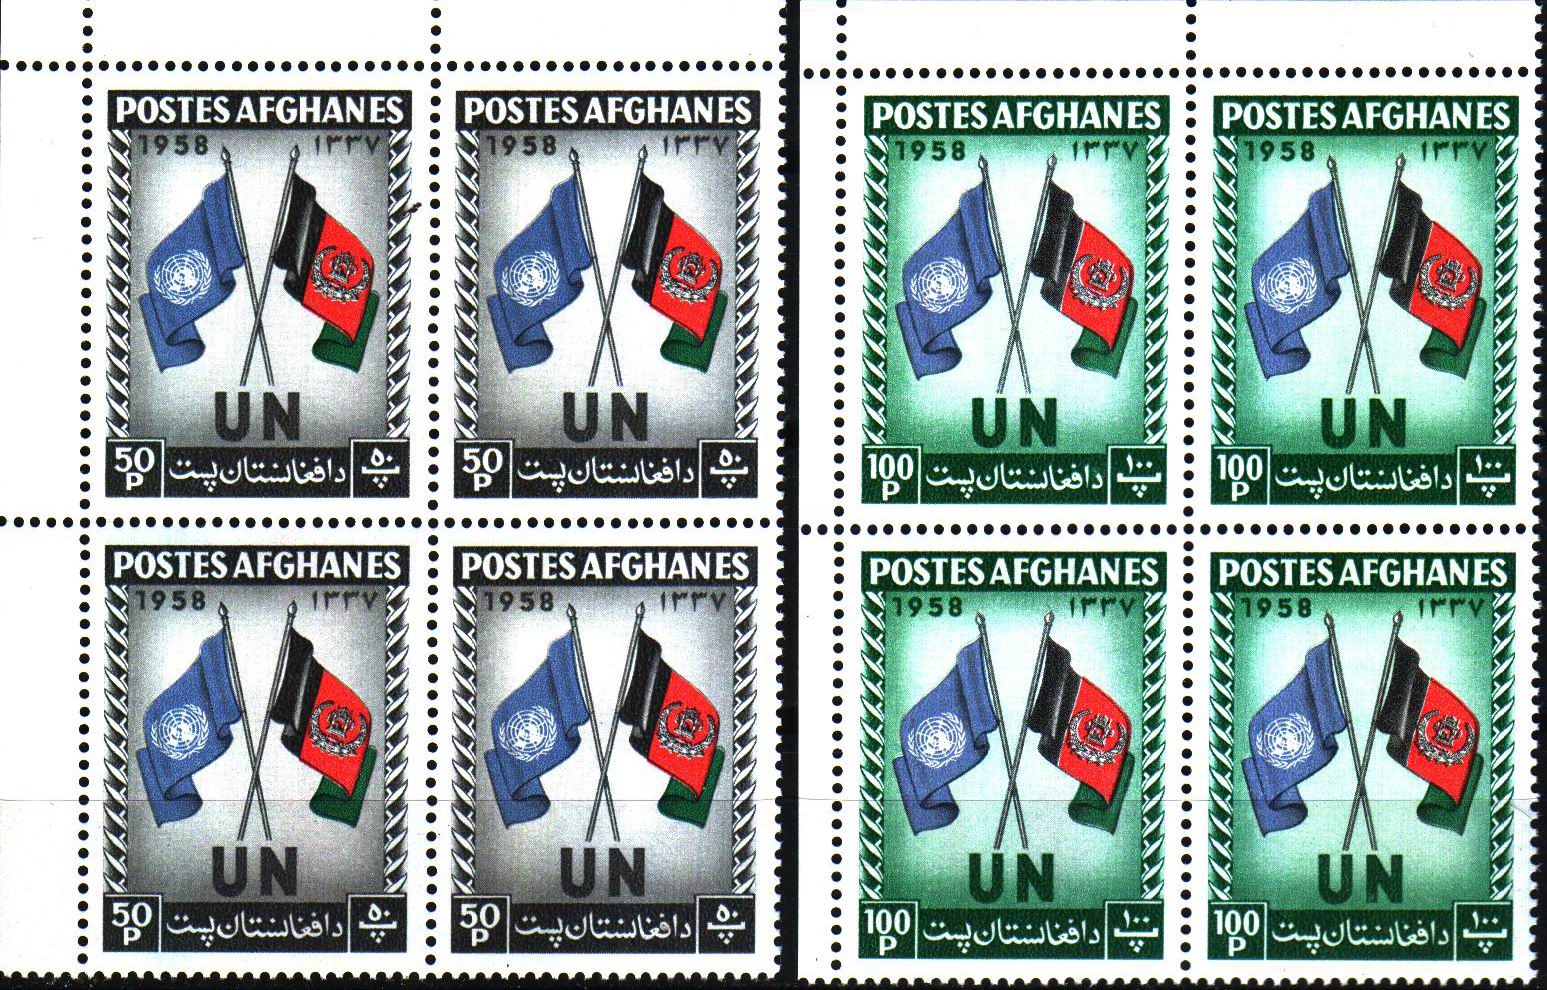 Afghanistan 2007 Stamp 3rd Meeting ECO Summit Postal Authorities - Click Image to Close